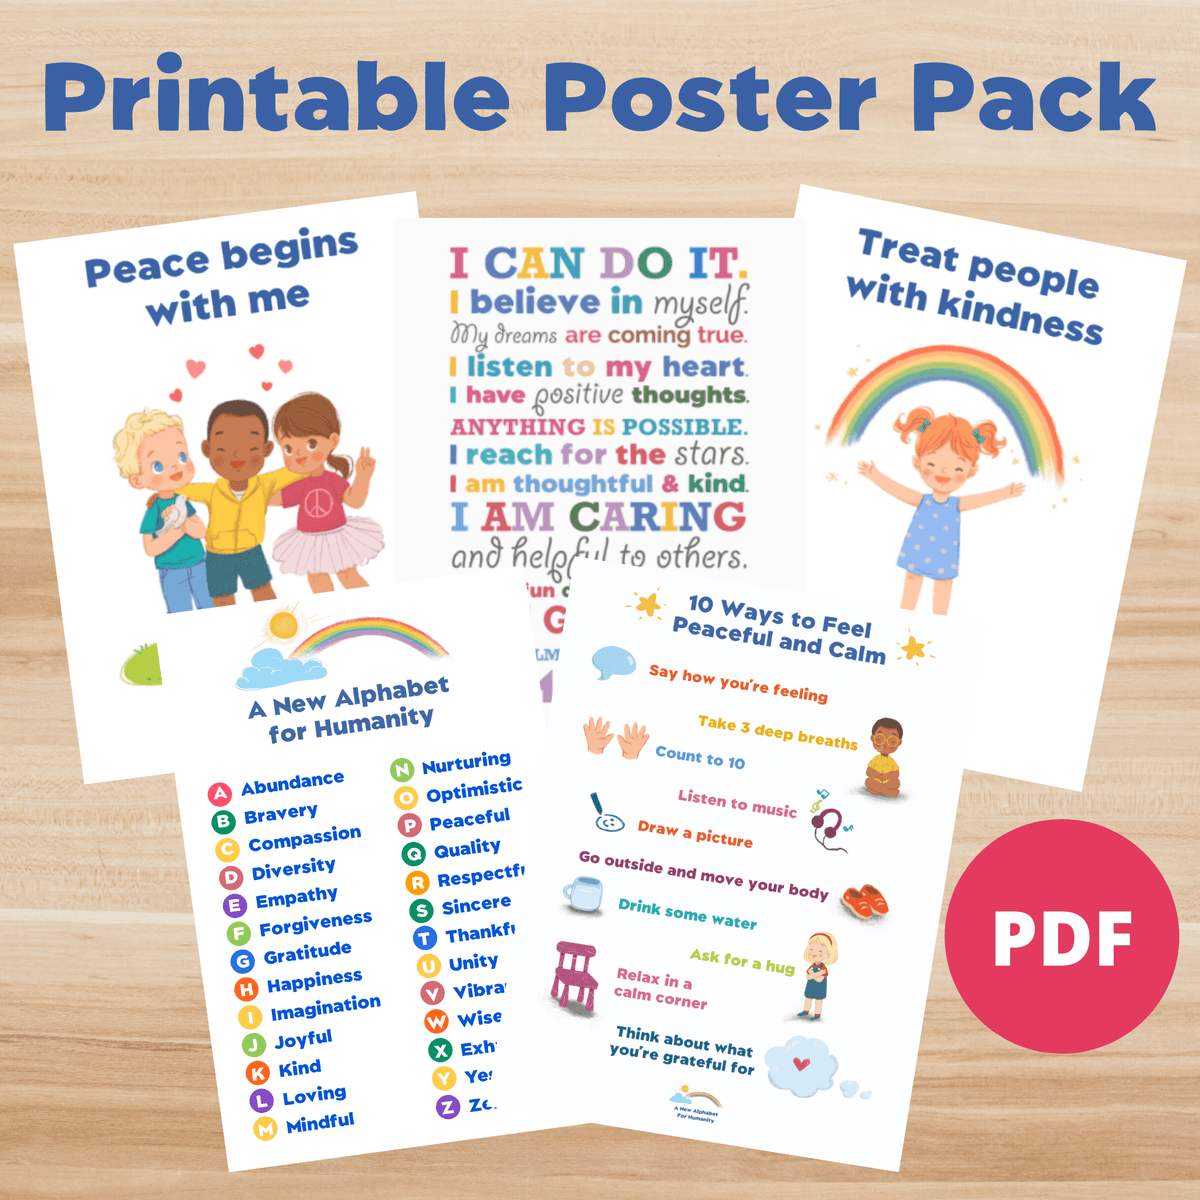 Inspirational Poster Pack (PRINTABLE PDF) - Alphabet For Humanity